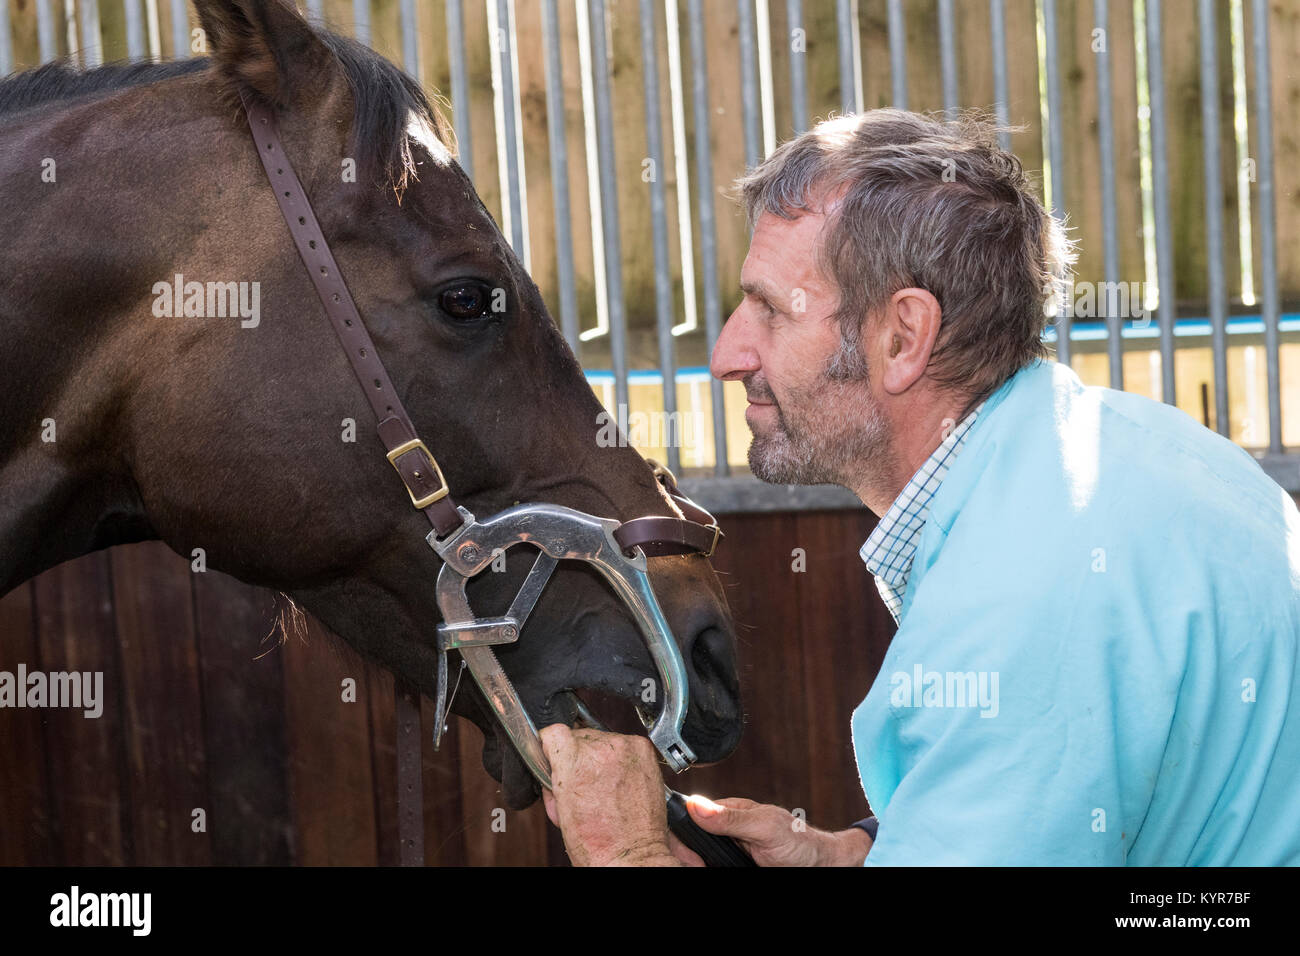 Horse dentist working on teeth of a throughbred horse. North Yorkshire, UK. Stock Photo